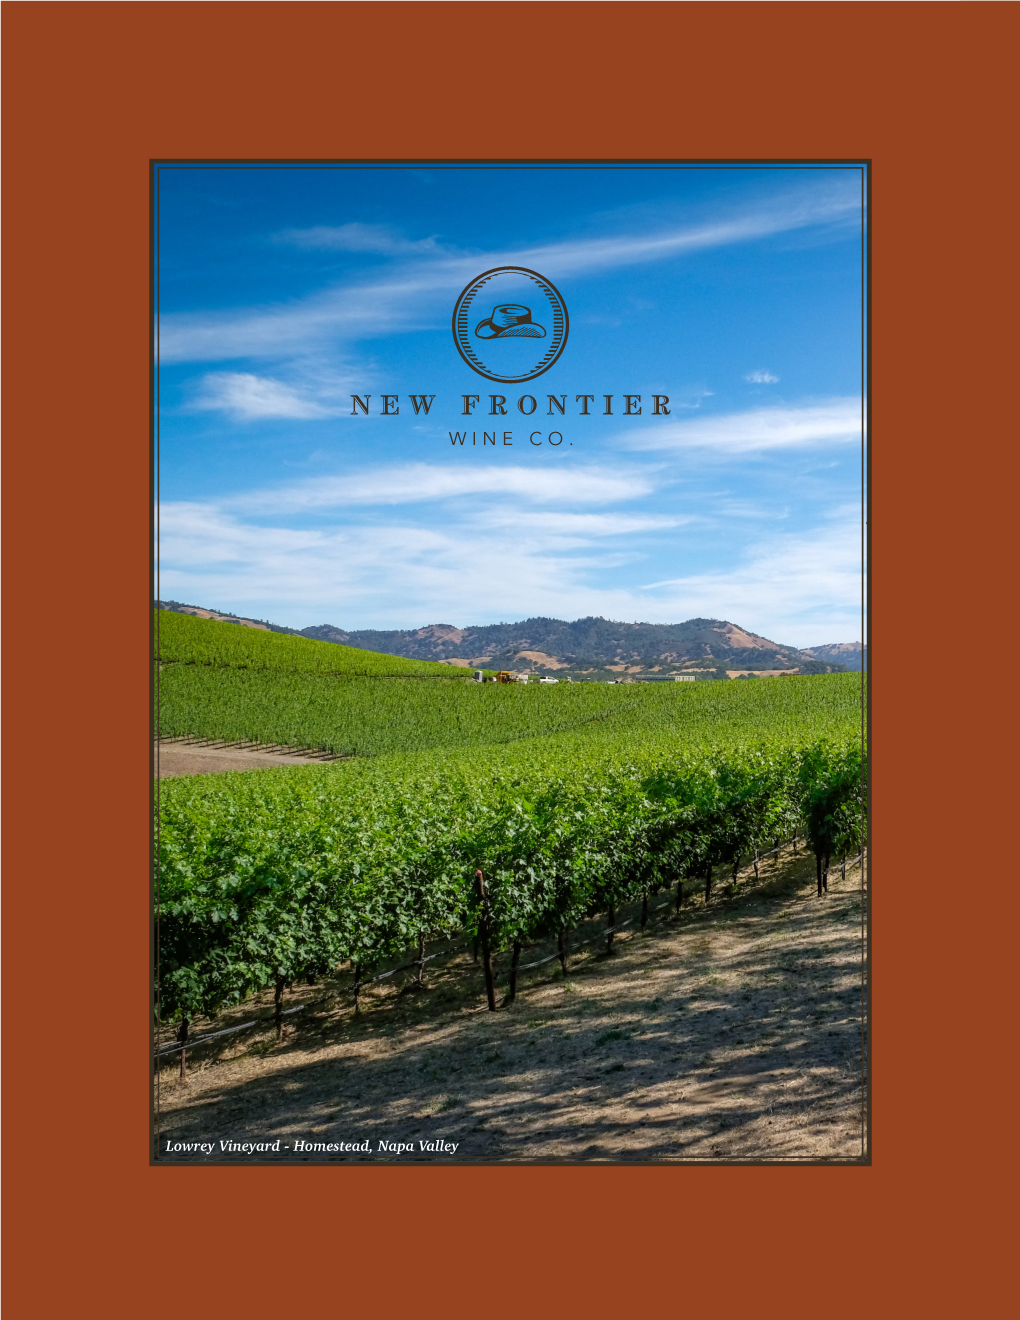 Lowrey Vineyard - Homestead, Napa Valley a Fusion of Innovation and Tradition